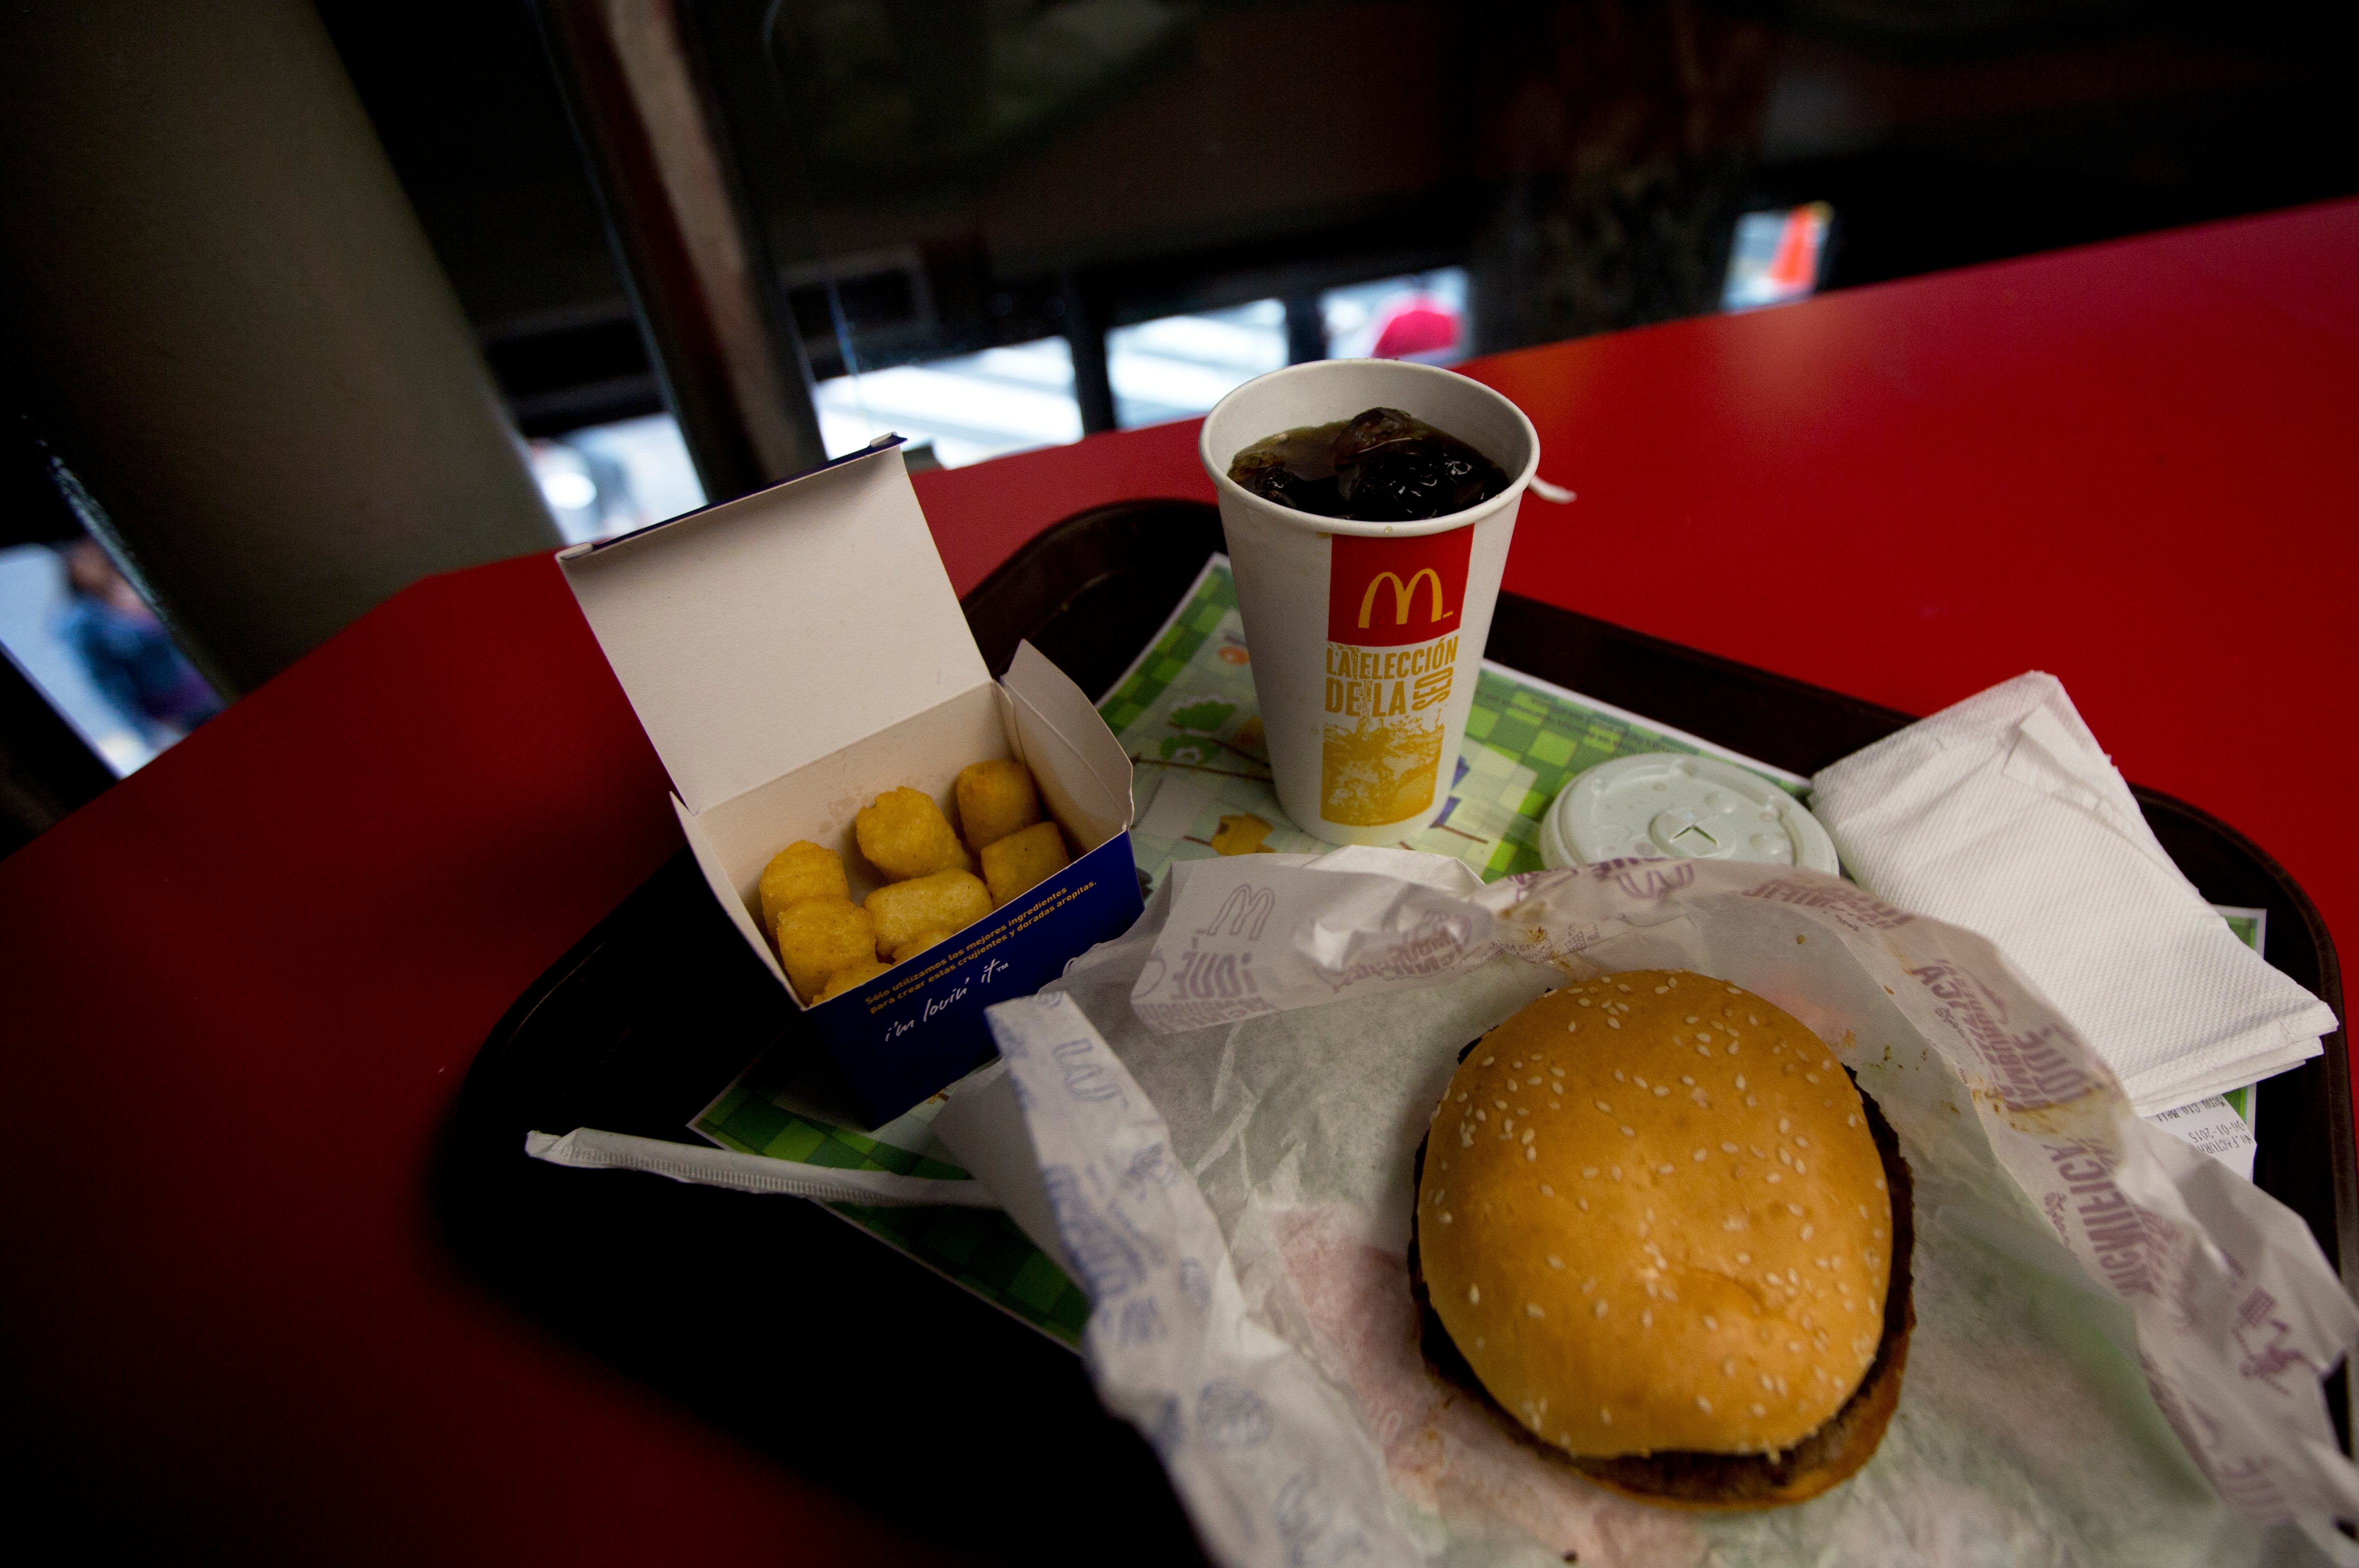 A Quarter Pounder meal is served with arepas or corn cakes at a local McDonald's, in Caracas, Venezuela, on Jan. 6, 2015. (Fernando Llano&amp;mdash;AP)